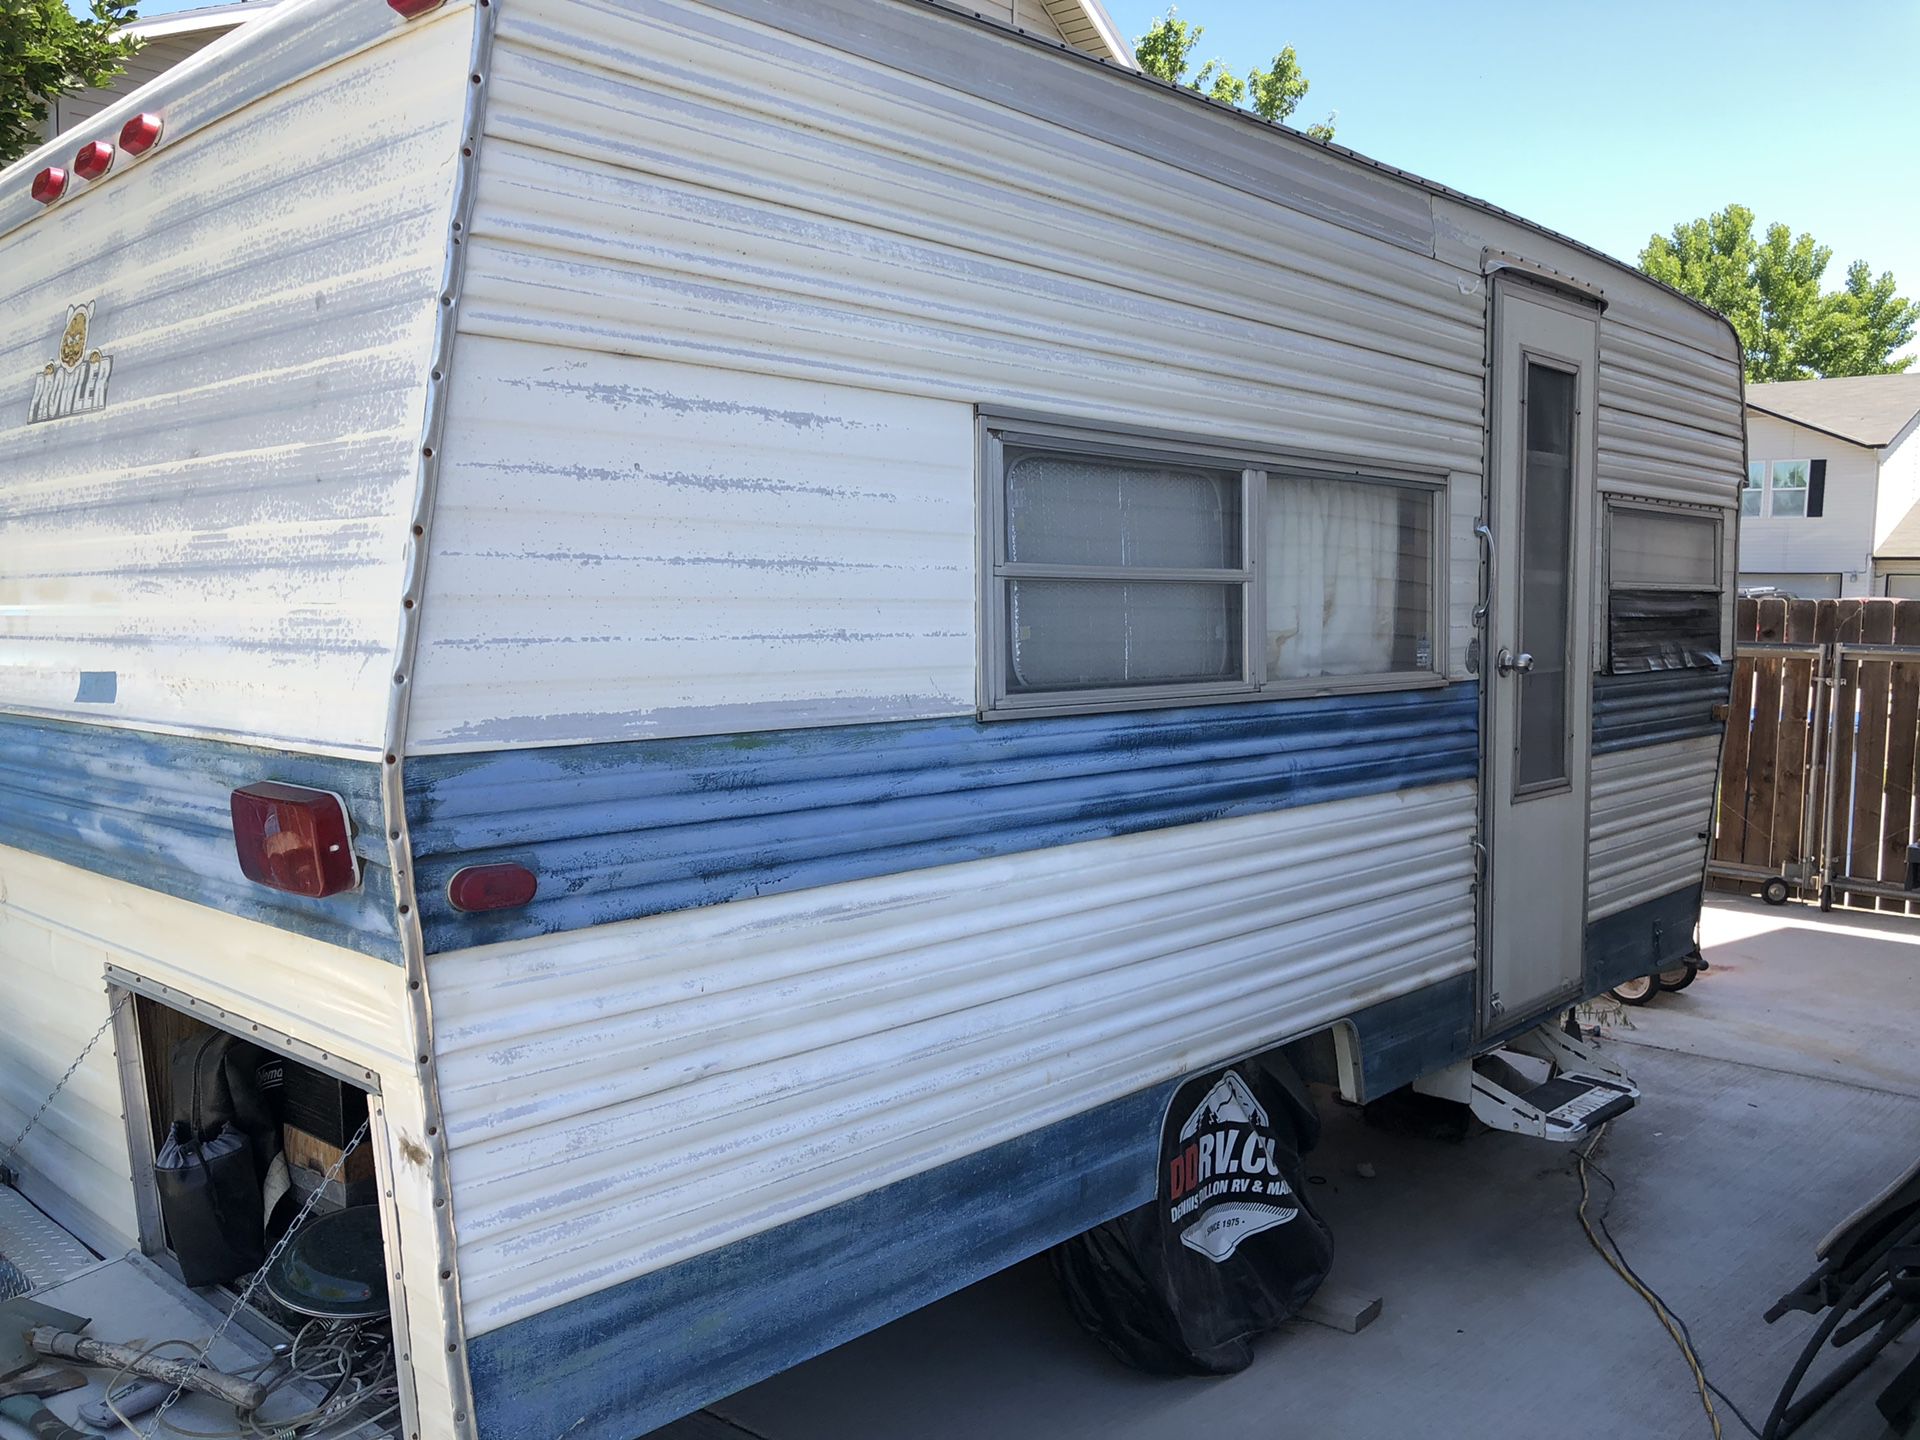 1971 Prowler camp trailer